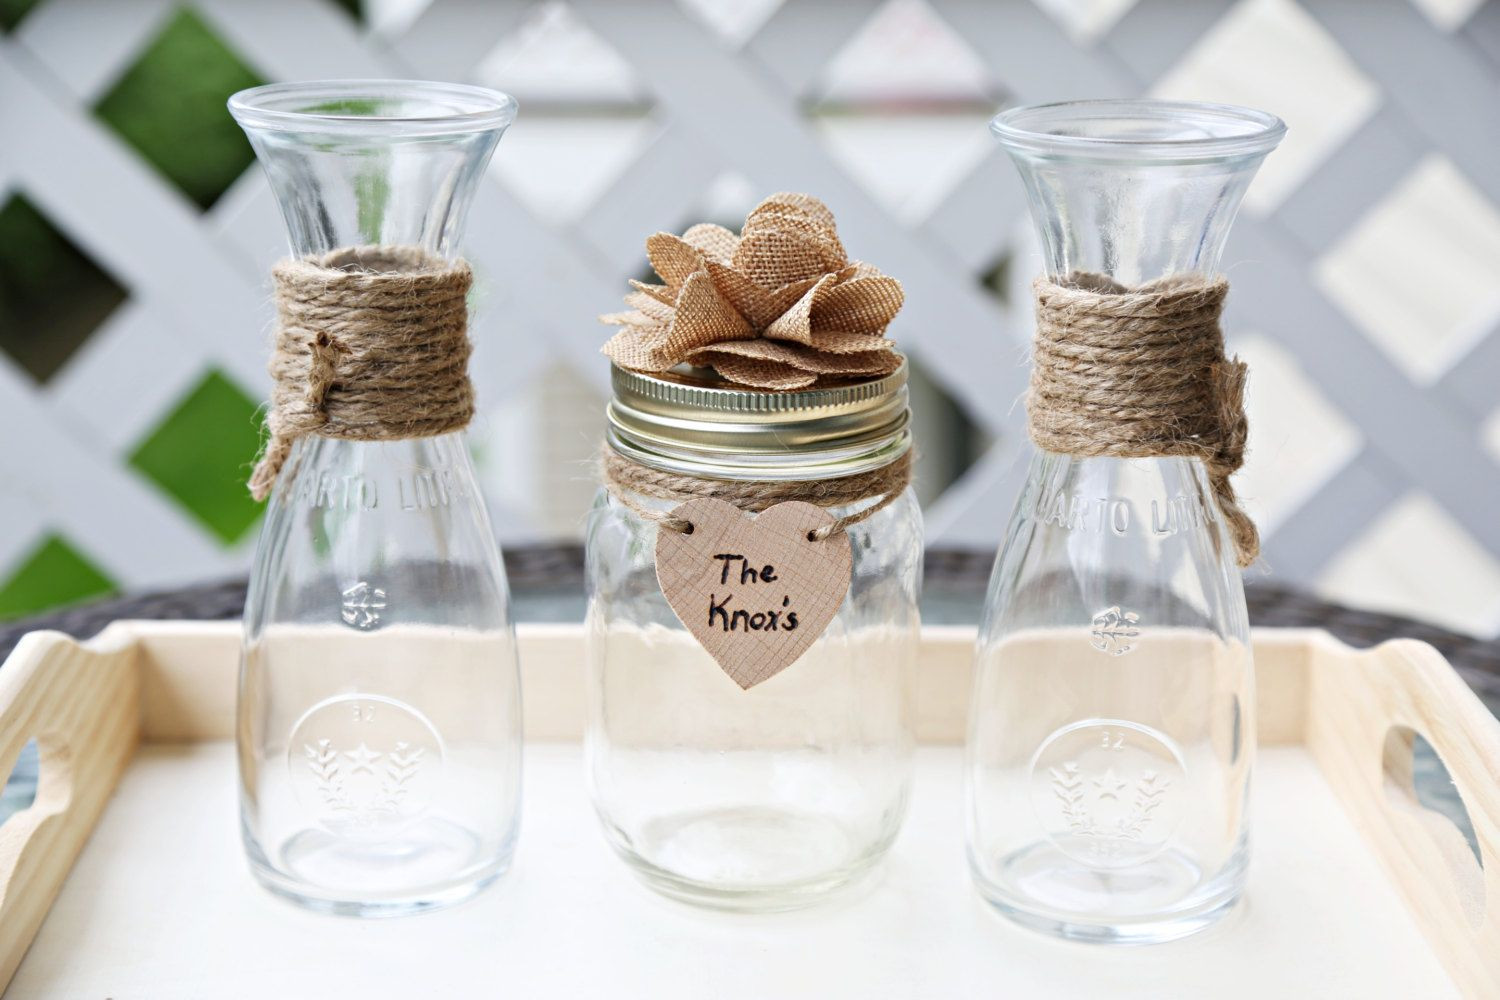 26 Amazing Wedding Sand Vase 2024 free download wedding sand vase of personalized rustic shabby chic theme mason by knoxprophotography in personalized rustic theme mason jar vase wedding unity sand ceremony collection set of 3 glass vases